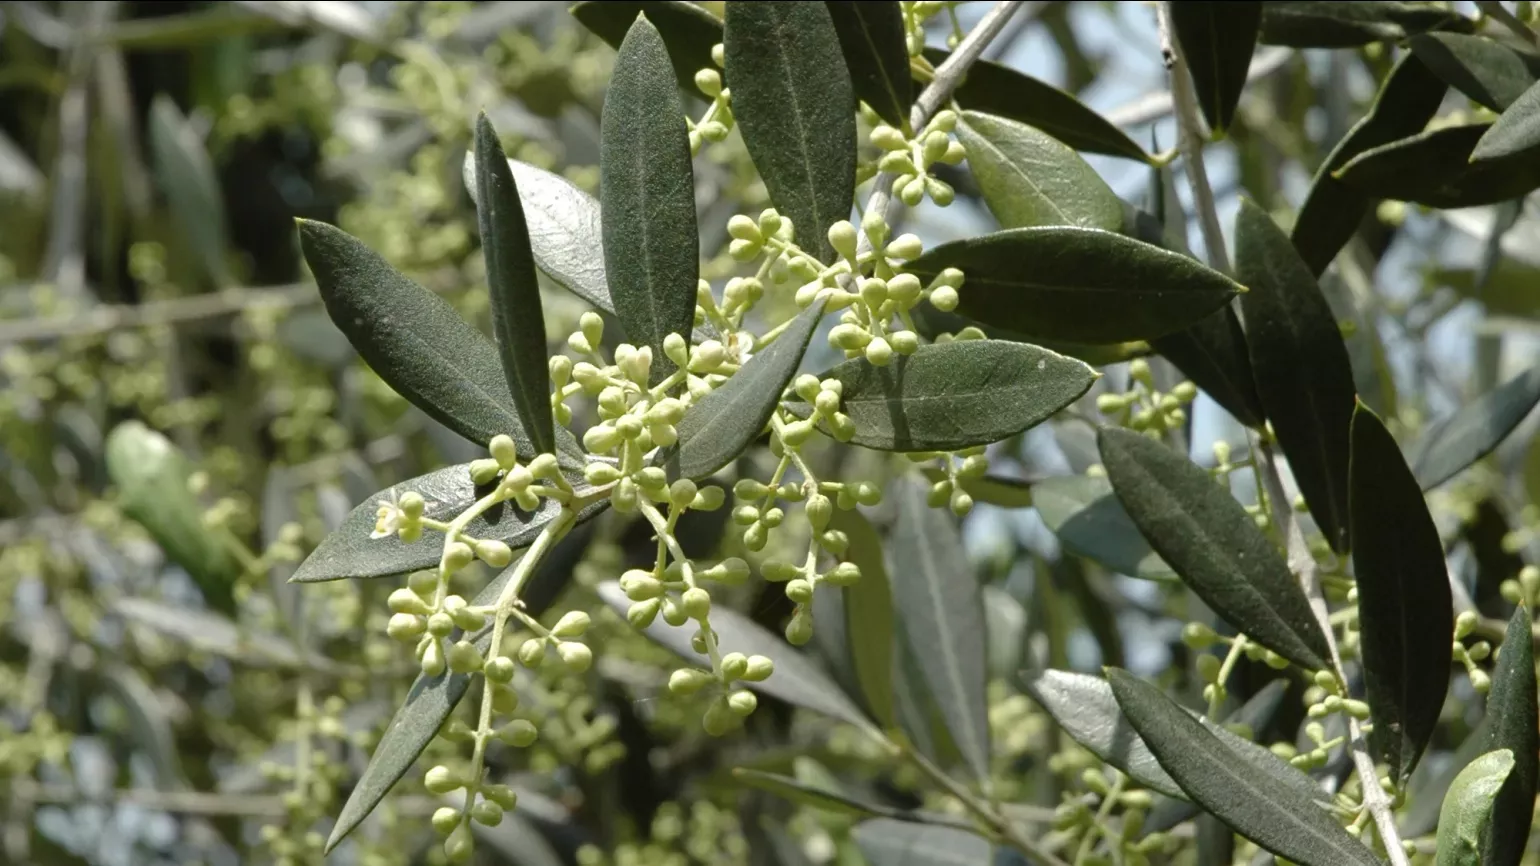 Olive tree with clusters of small, whitish flowers